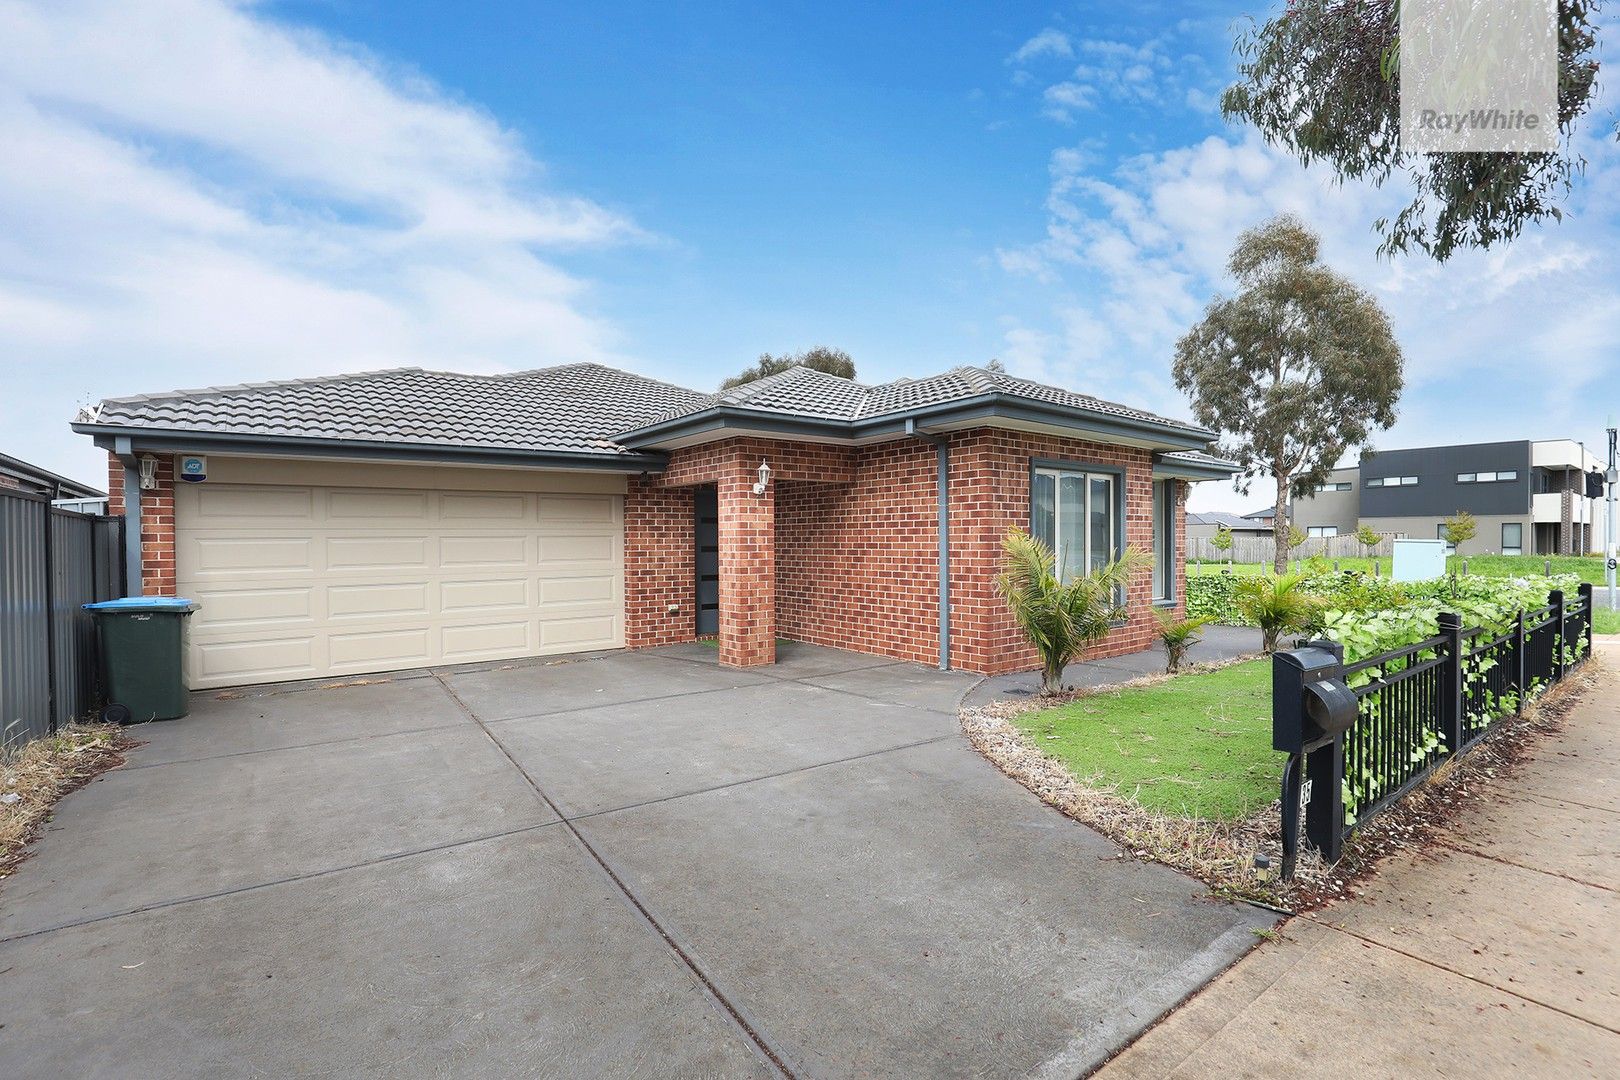 135 Tom Roberts Parade, Point Cook VIC 3030 House For Rent 525